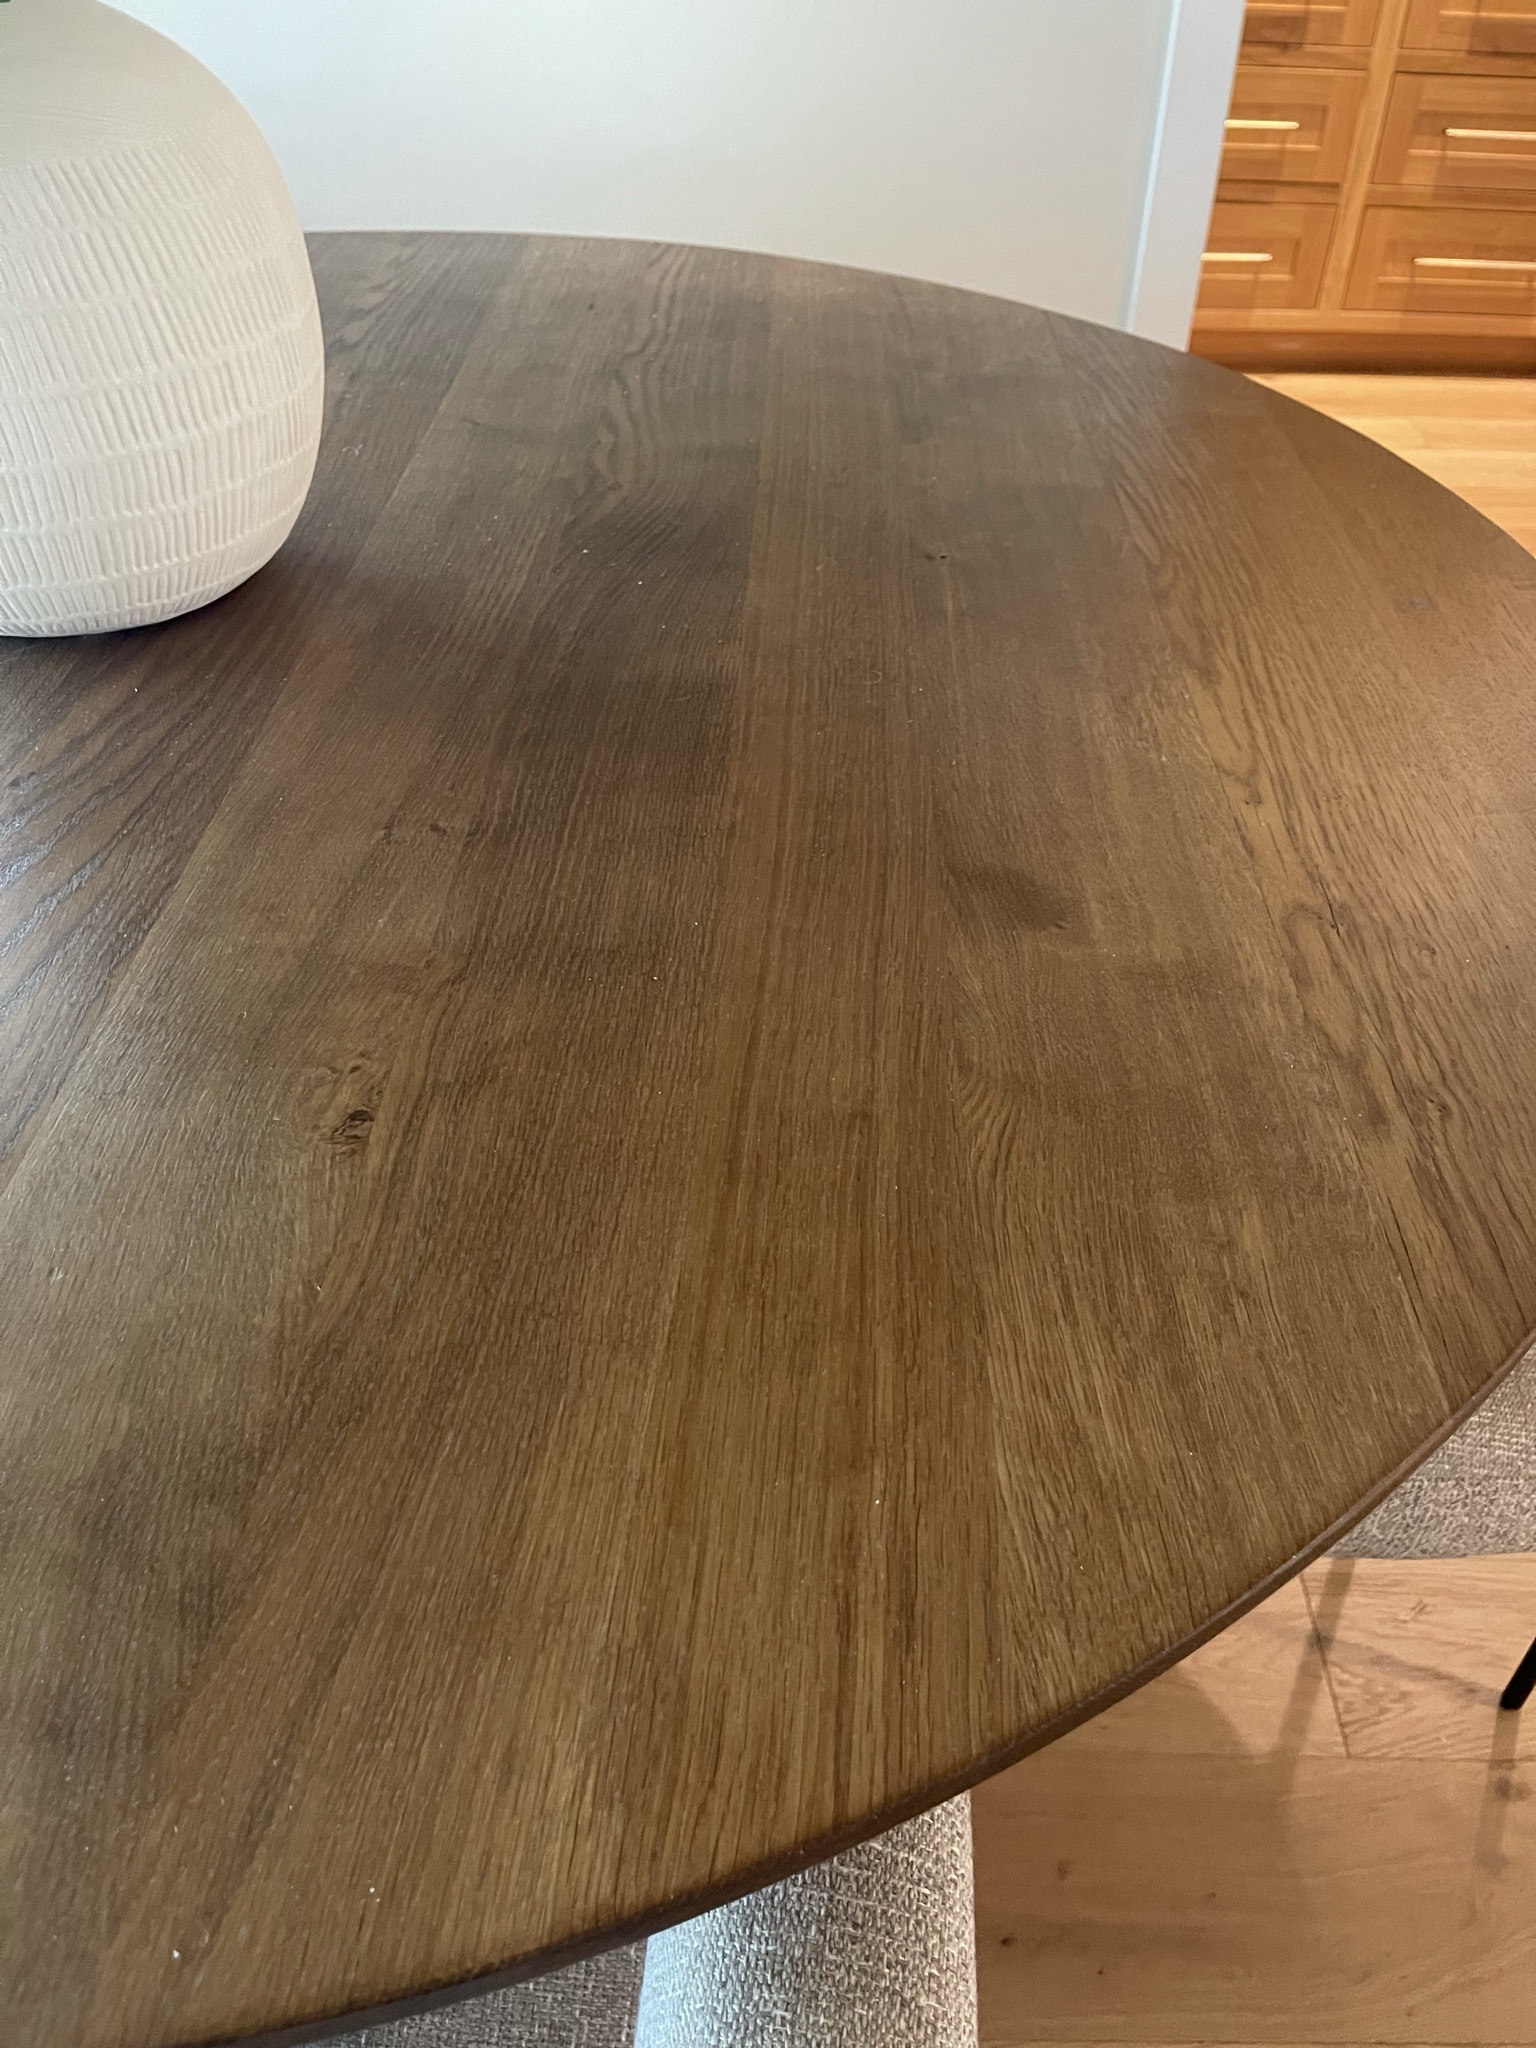 Dining Room Table Wood Grain Up Close